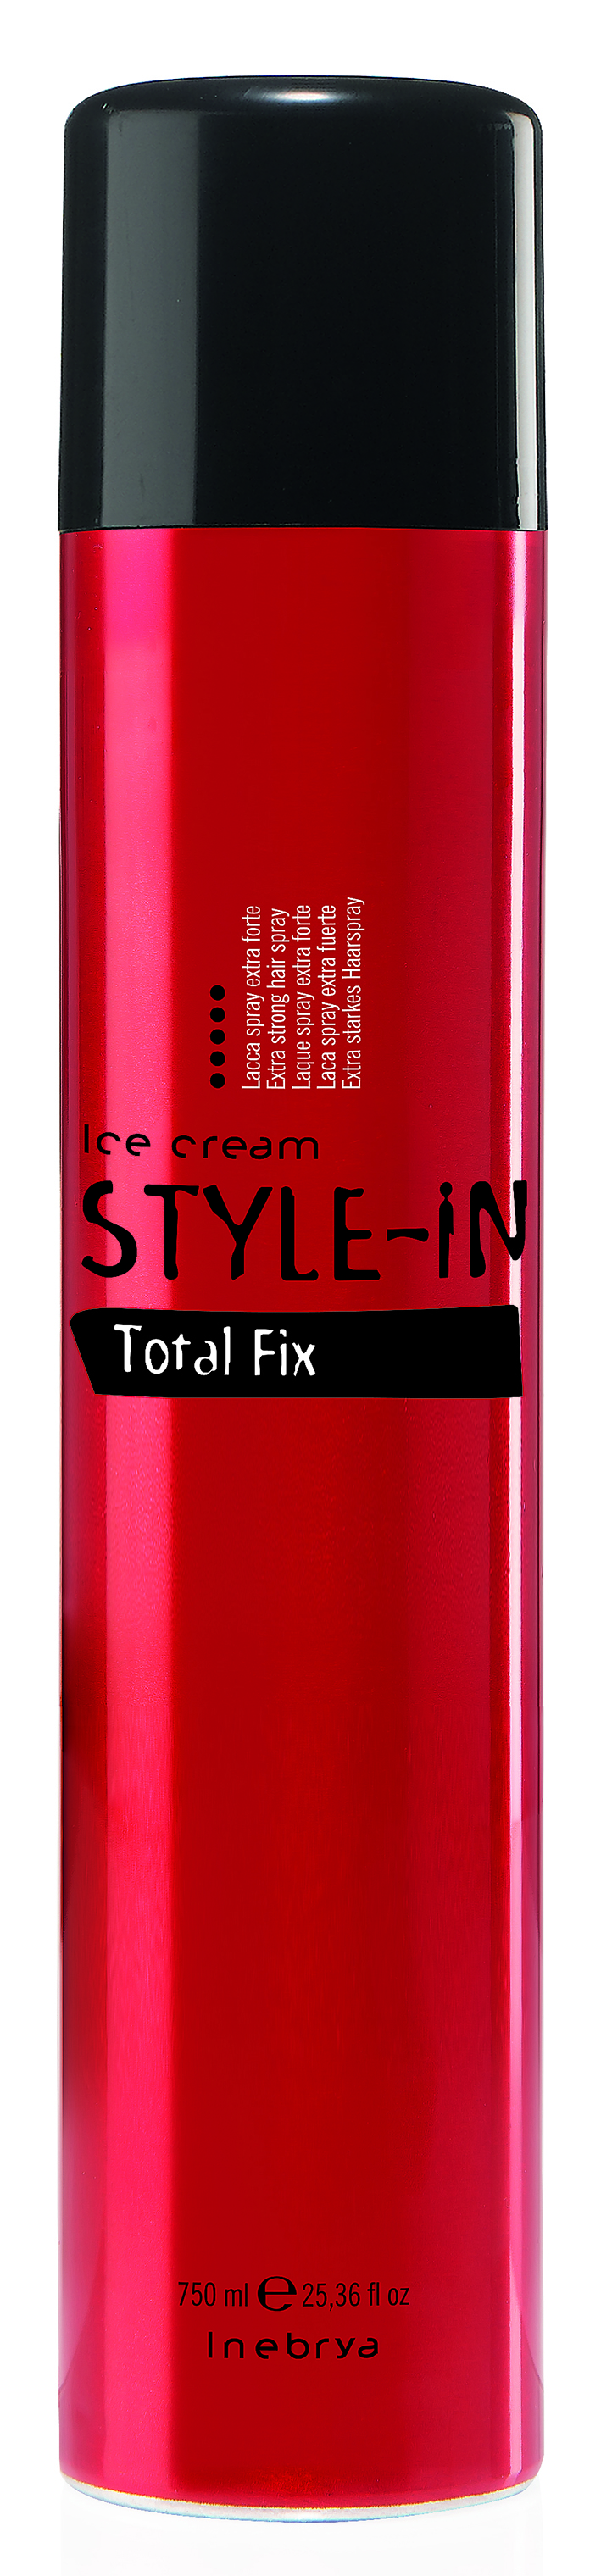 Style in Total Fix Spray